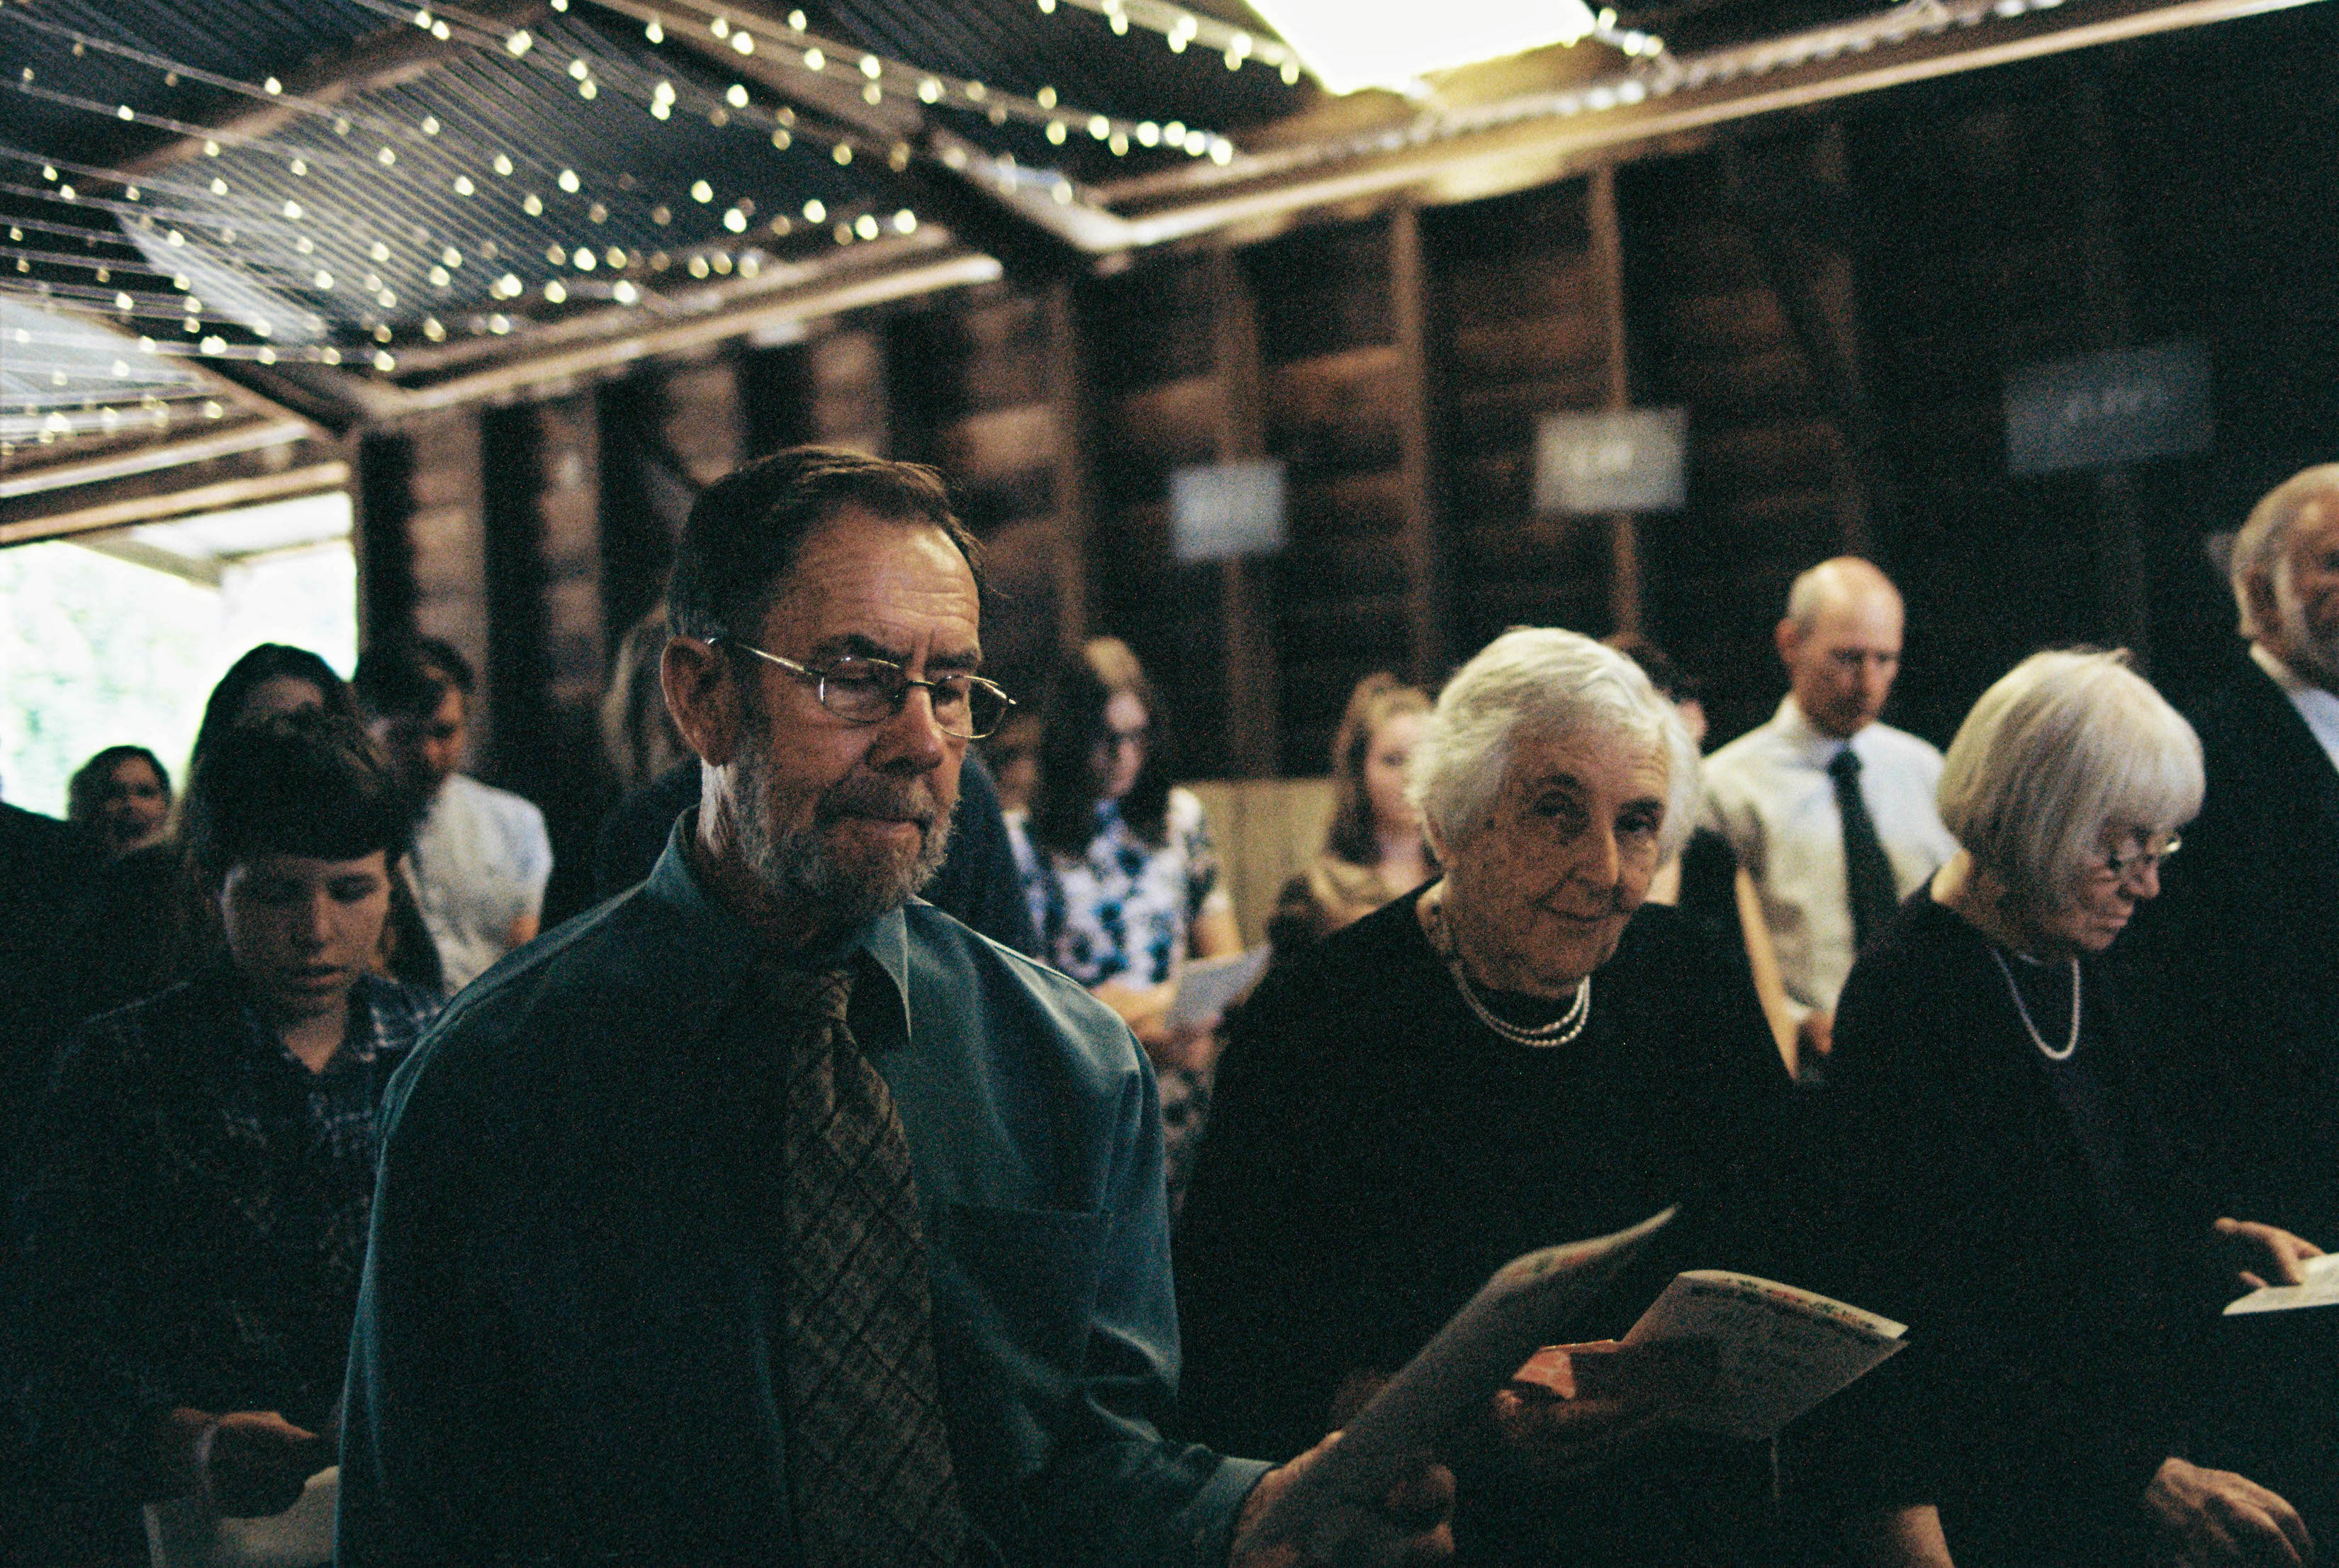 A picture of the Groom's Grandparents during his Wedding Ceremony at the family farm in the South West